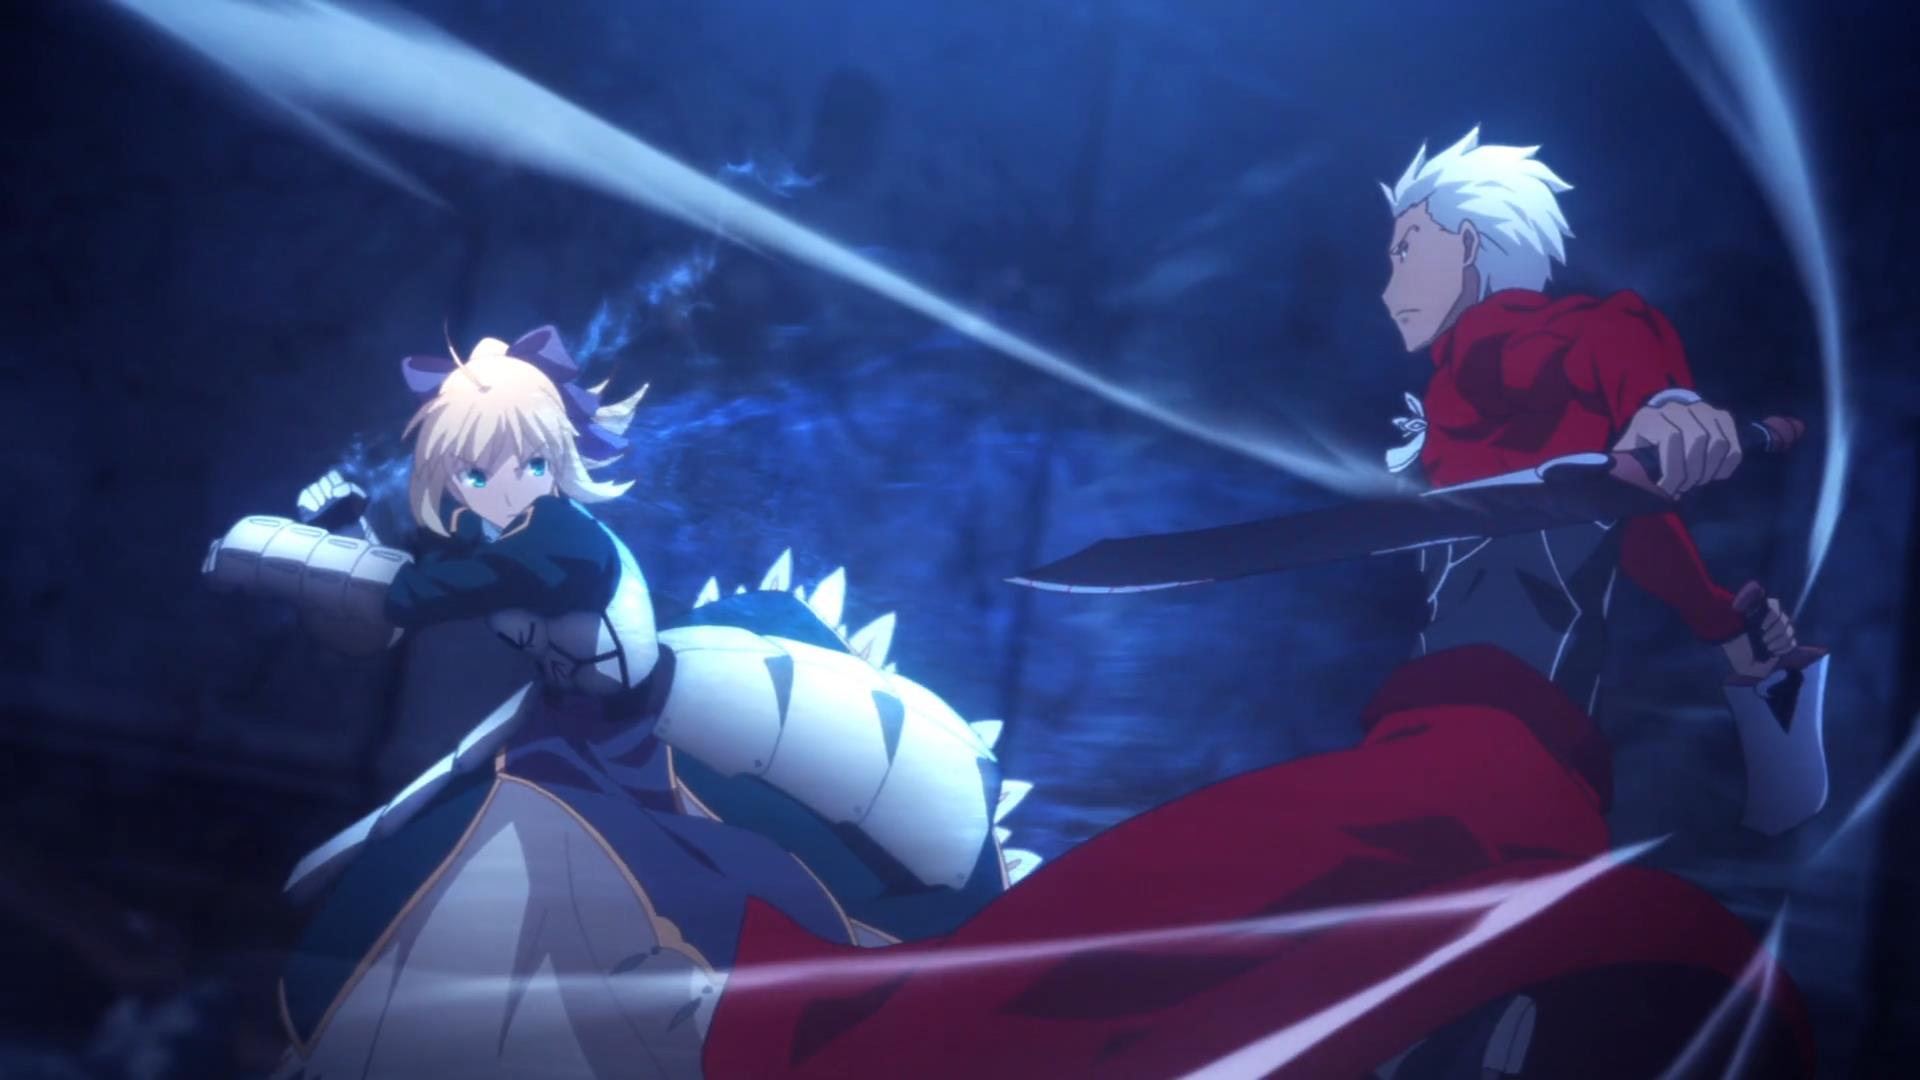 Fate/stay night: Unlimited Blade Works - 18 (What kind of magical twist is  this?) - AstroNerdBoy's Anime & Manga Blog | AstroNerdBoy's Anime & Manga  Blog